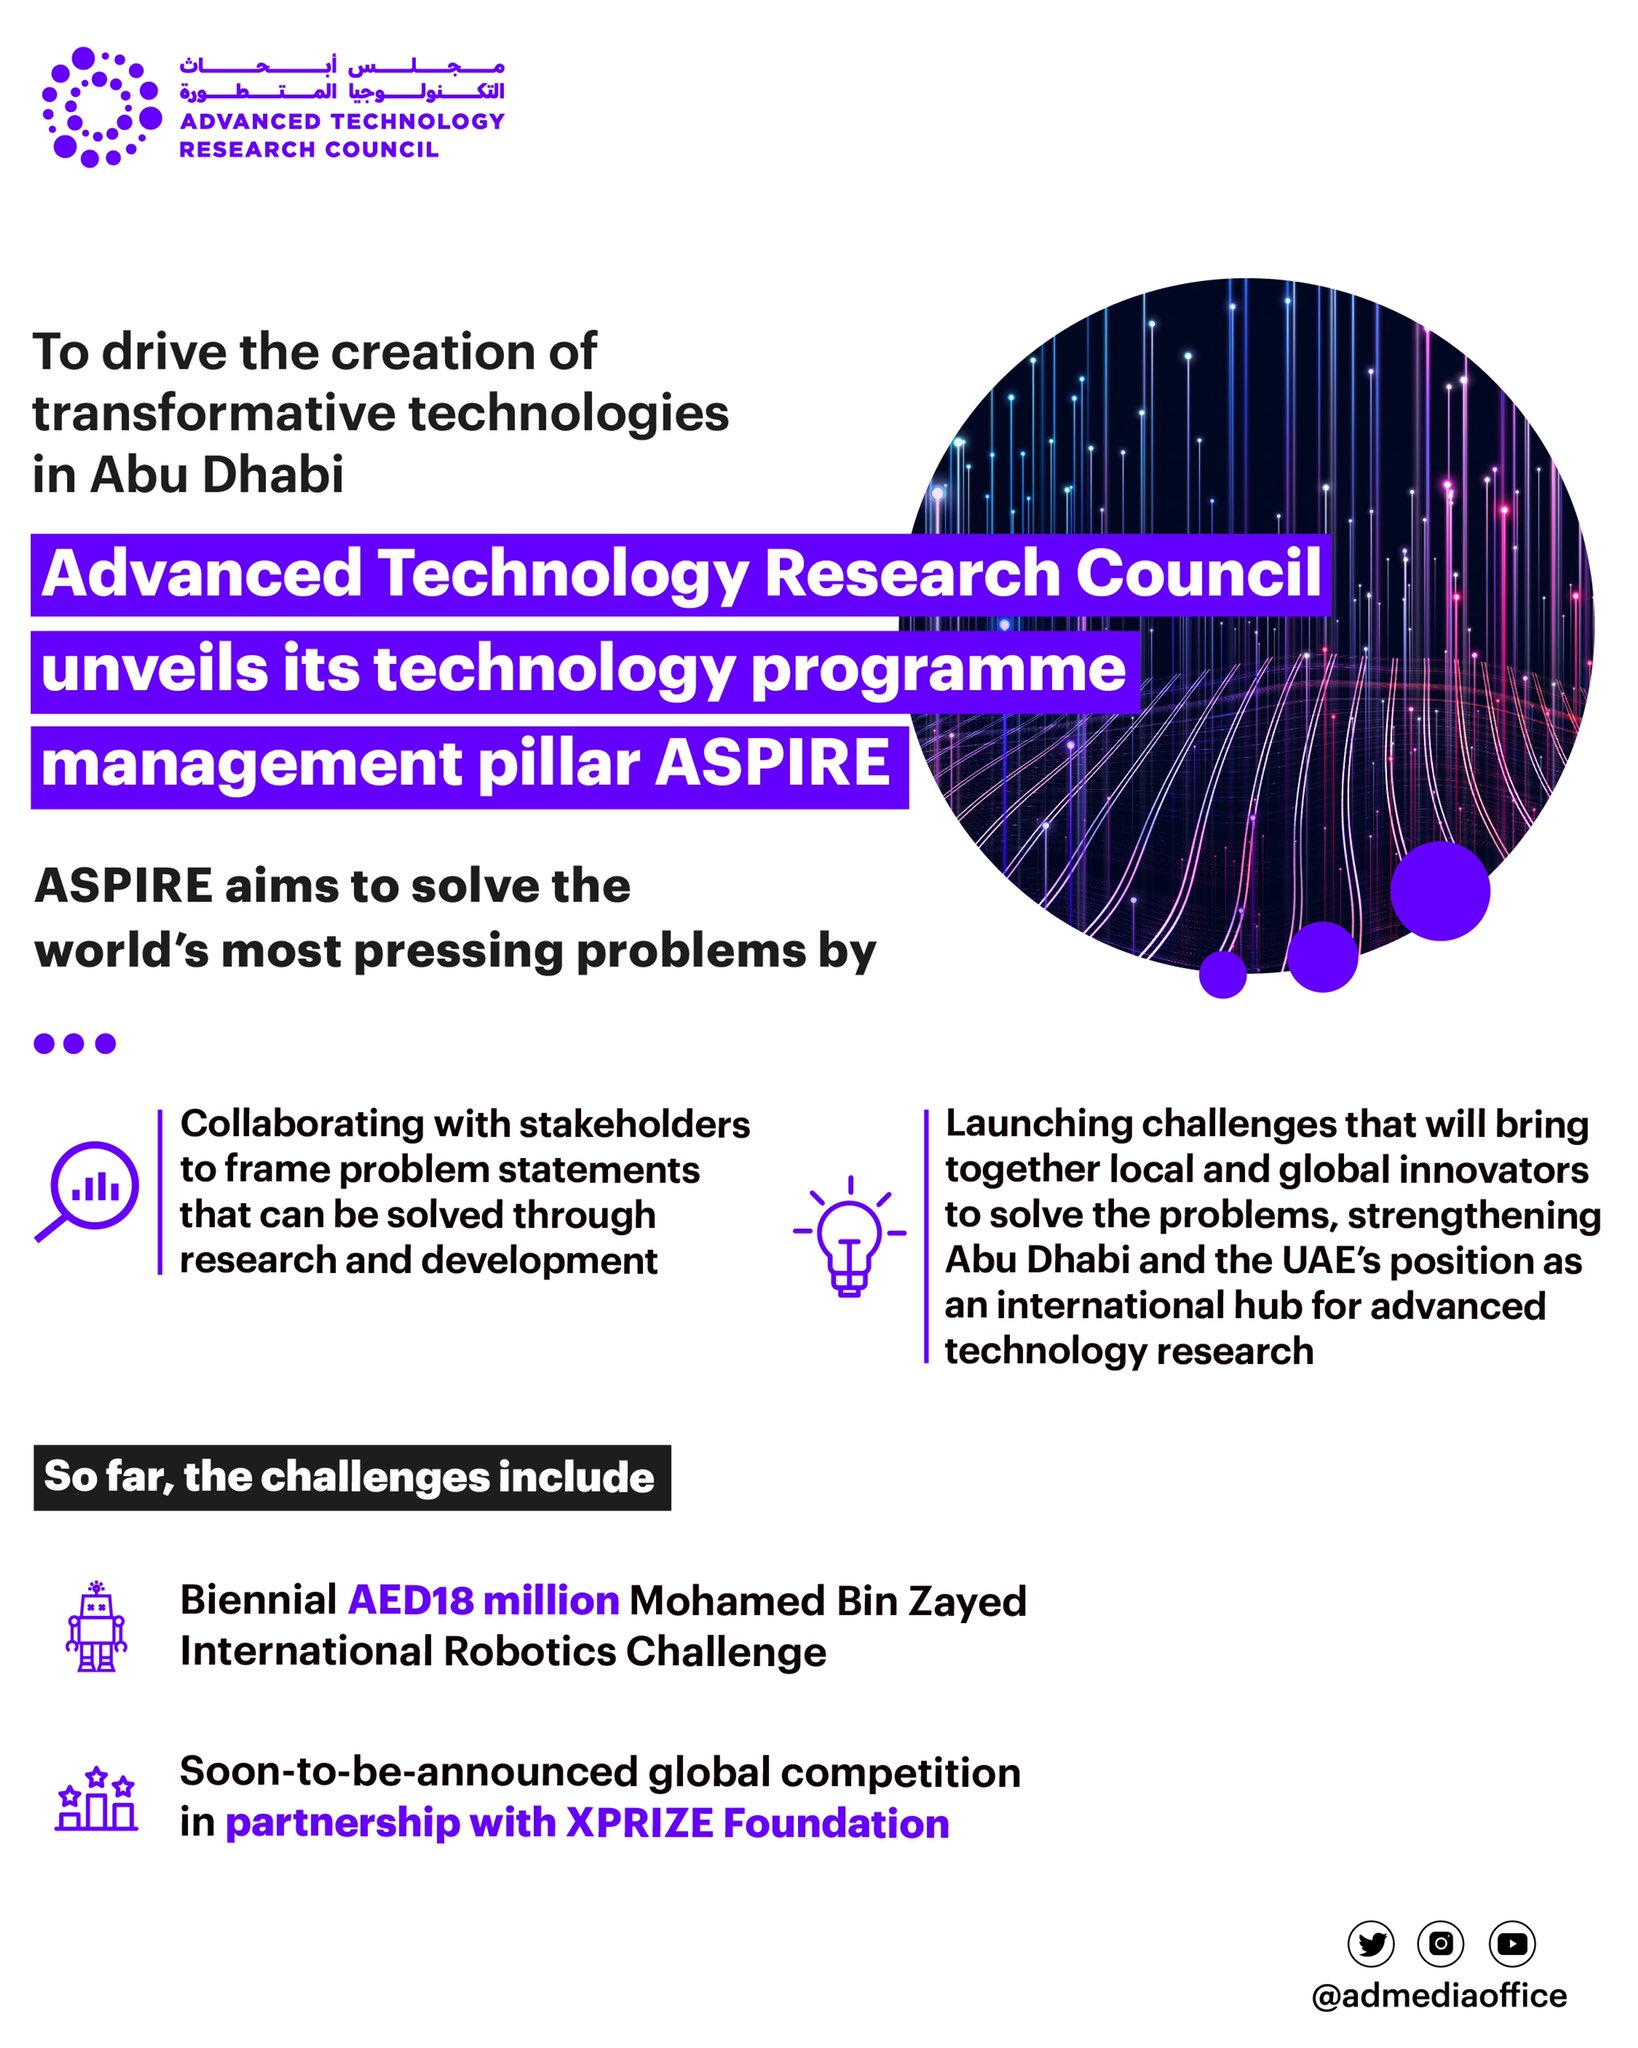 ATRC Launches ‘ASPIRE’ To Drive Creation Of Future Transformative Technologies